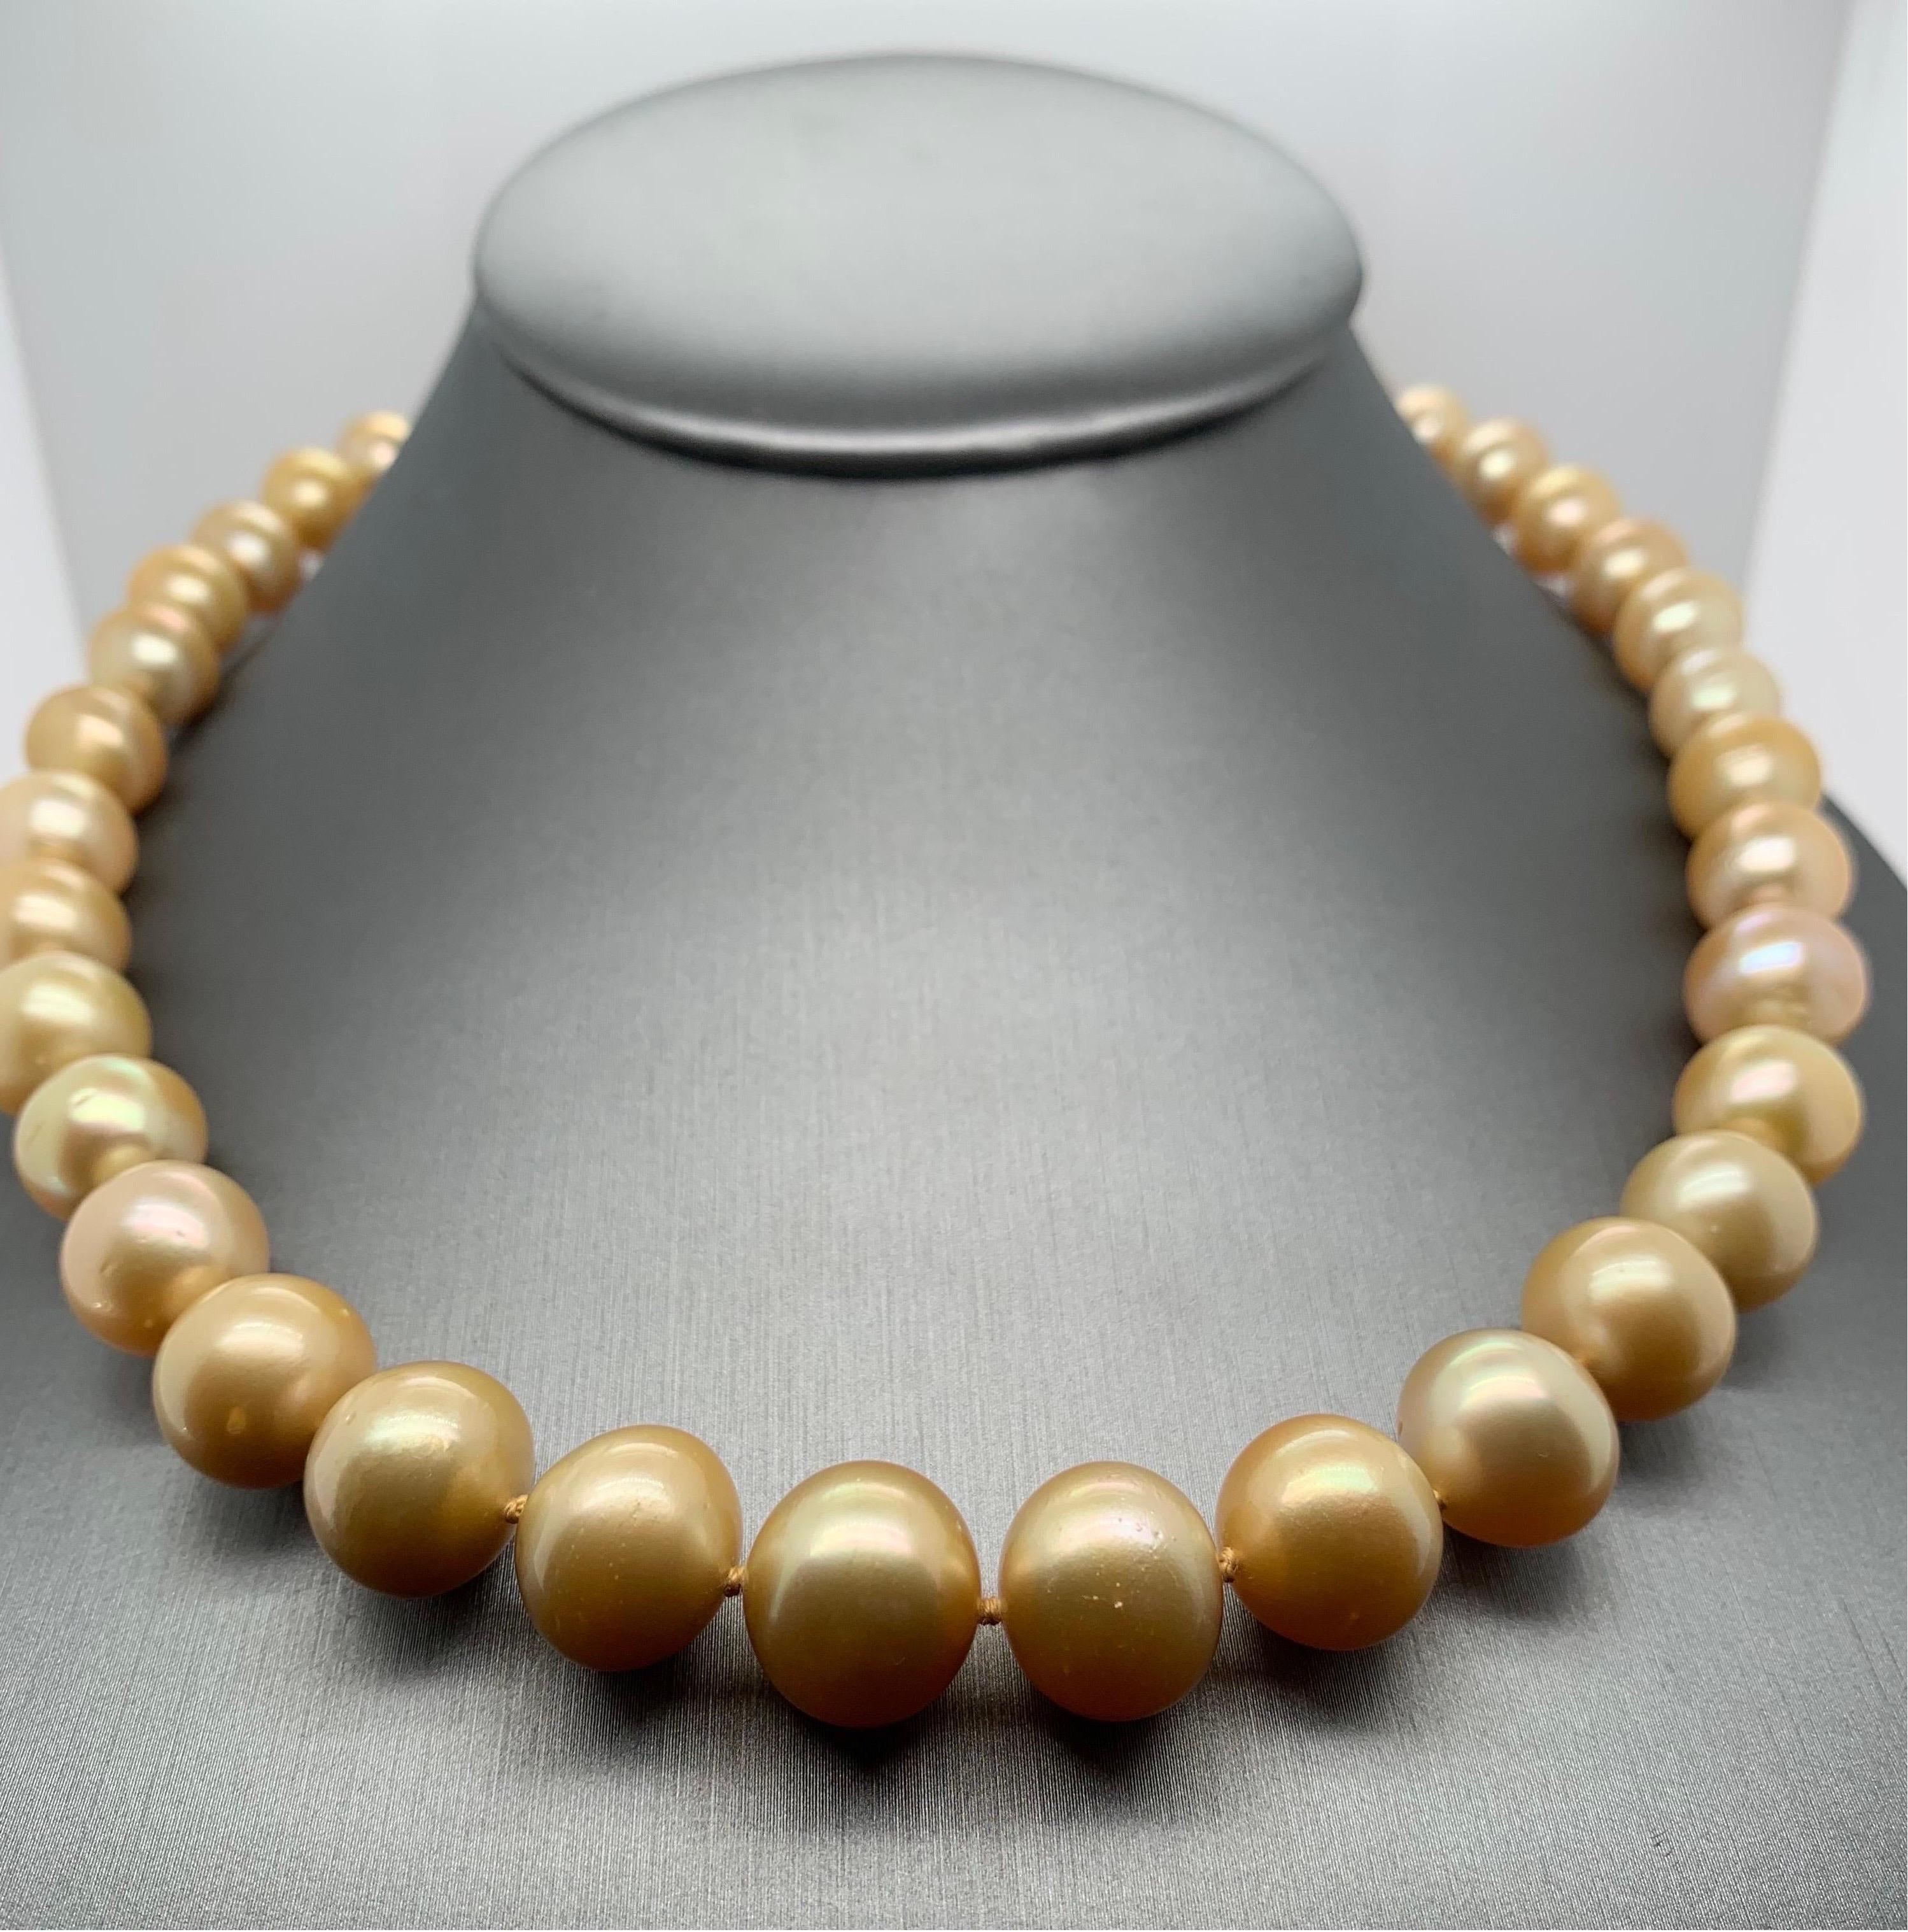 Elevate your look with a timeless graduated pearl necklace. This 18-19 inches long strand necklace is fully knotted and hand strung with matching silk cord. The necklace comprises 39 vivid sheen golden south sea pearls measuring 10-13.5mm and